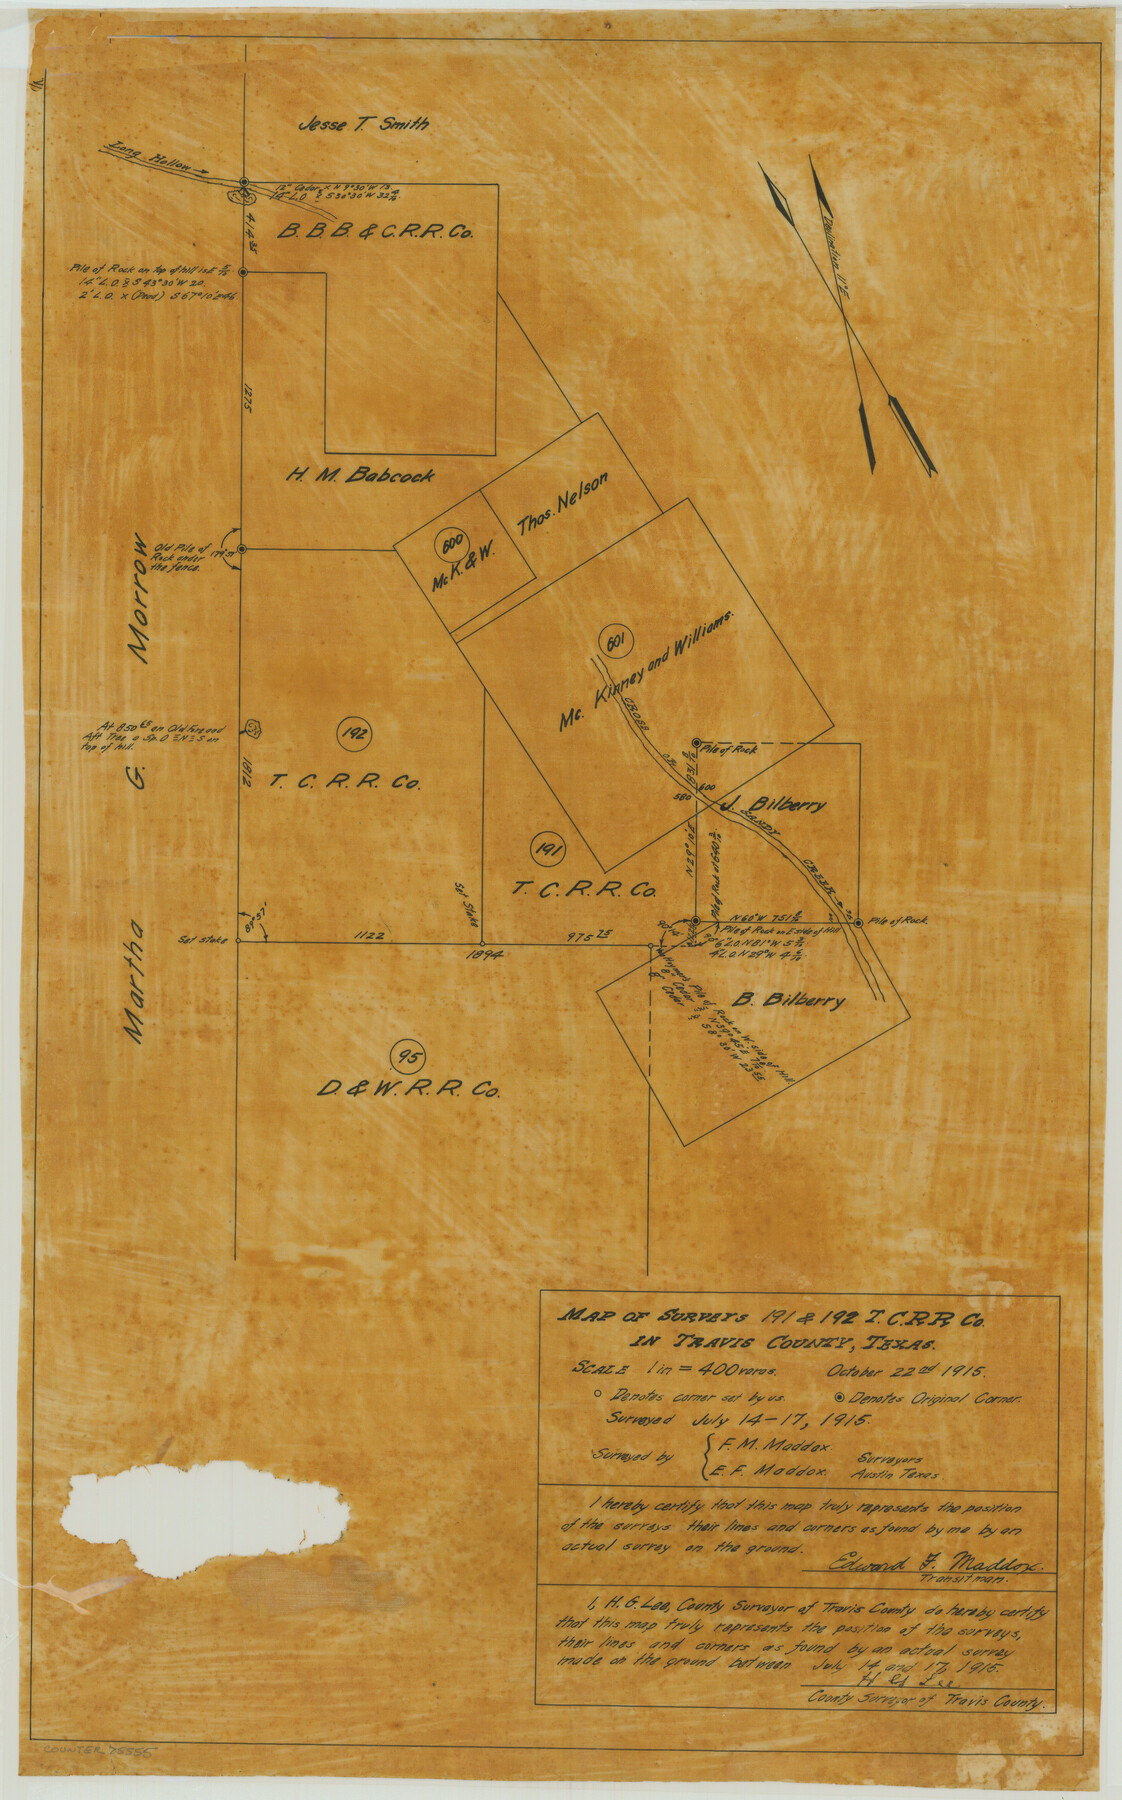 75555, Map of surveys 191 & 192 T. C. R.R. Co. in Travis County, Texas, Maddox Collection